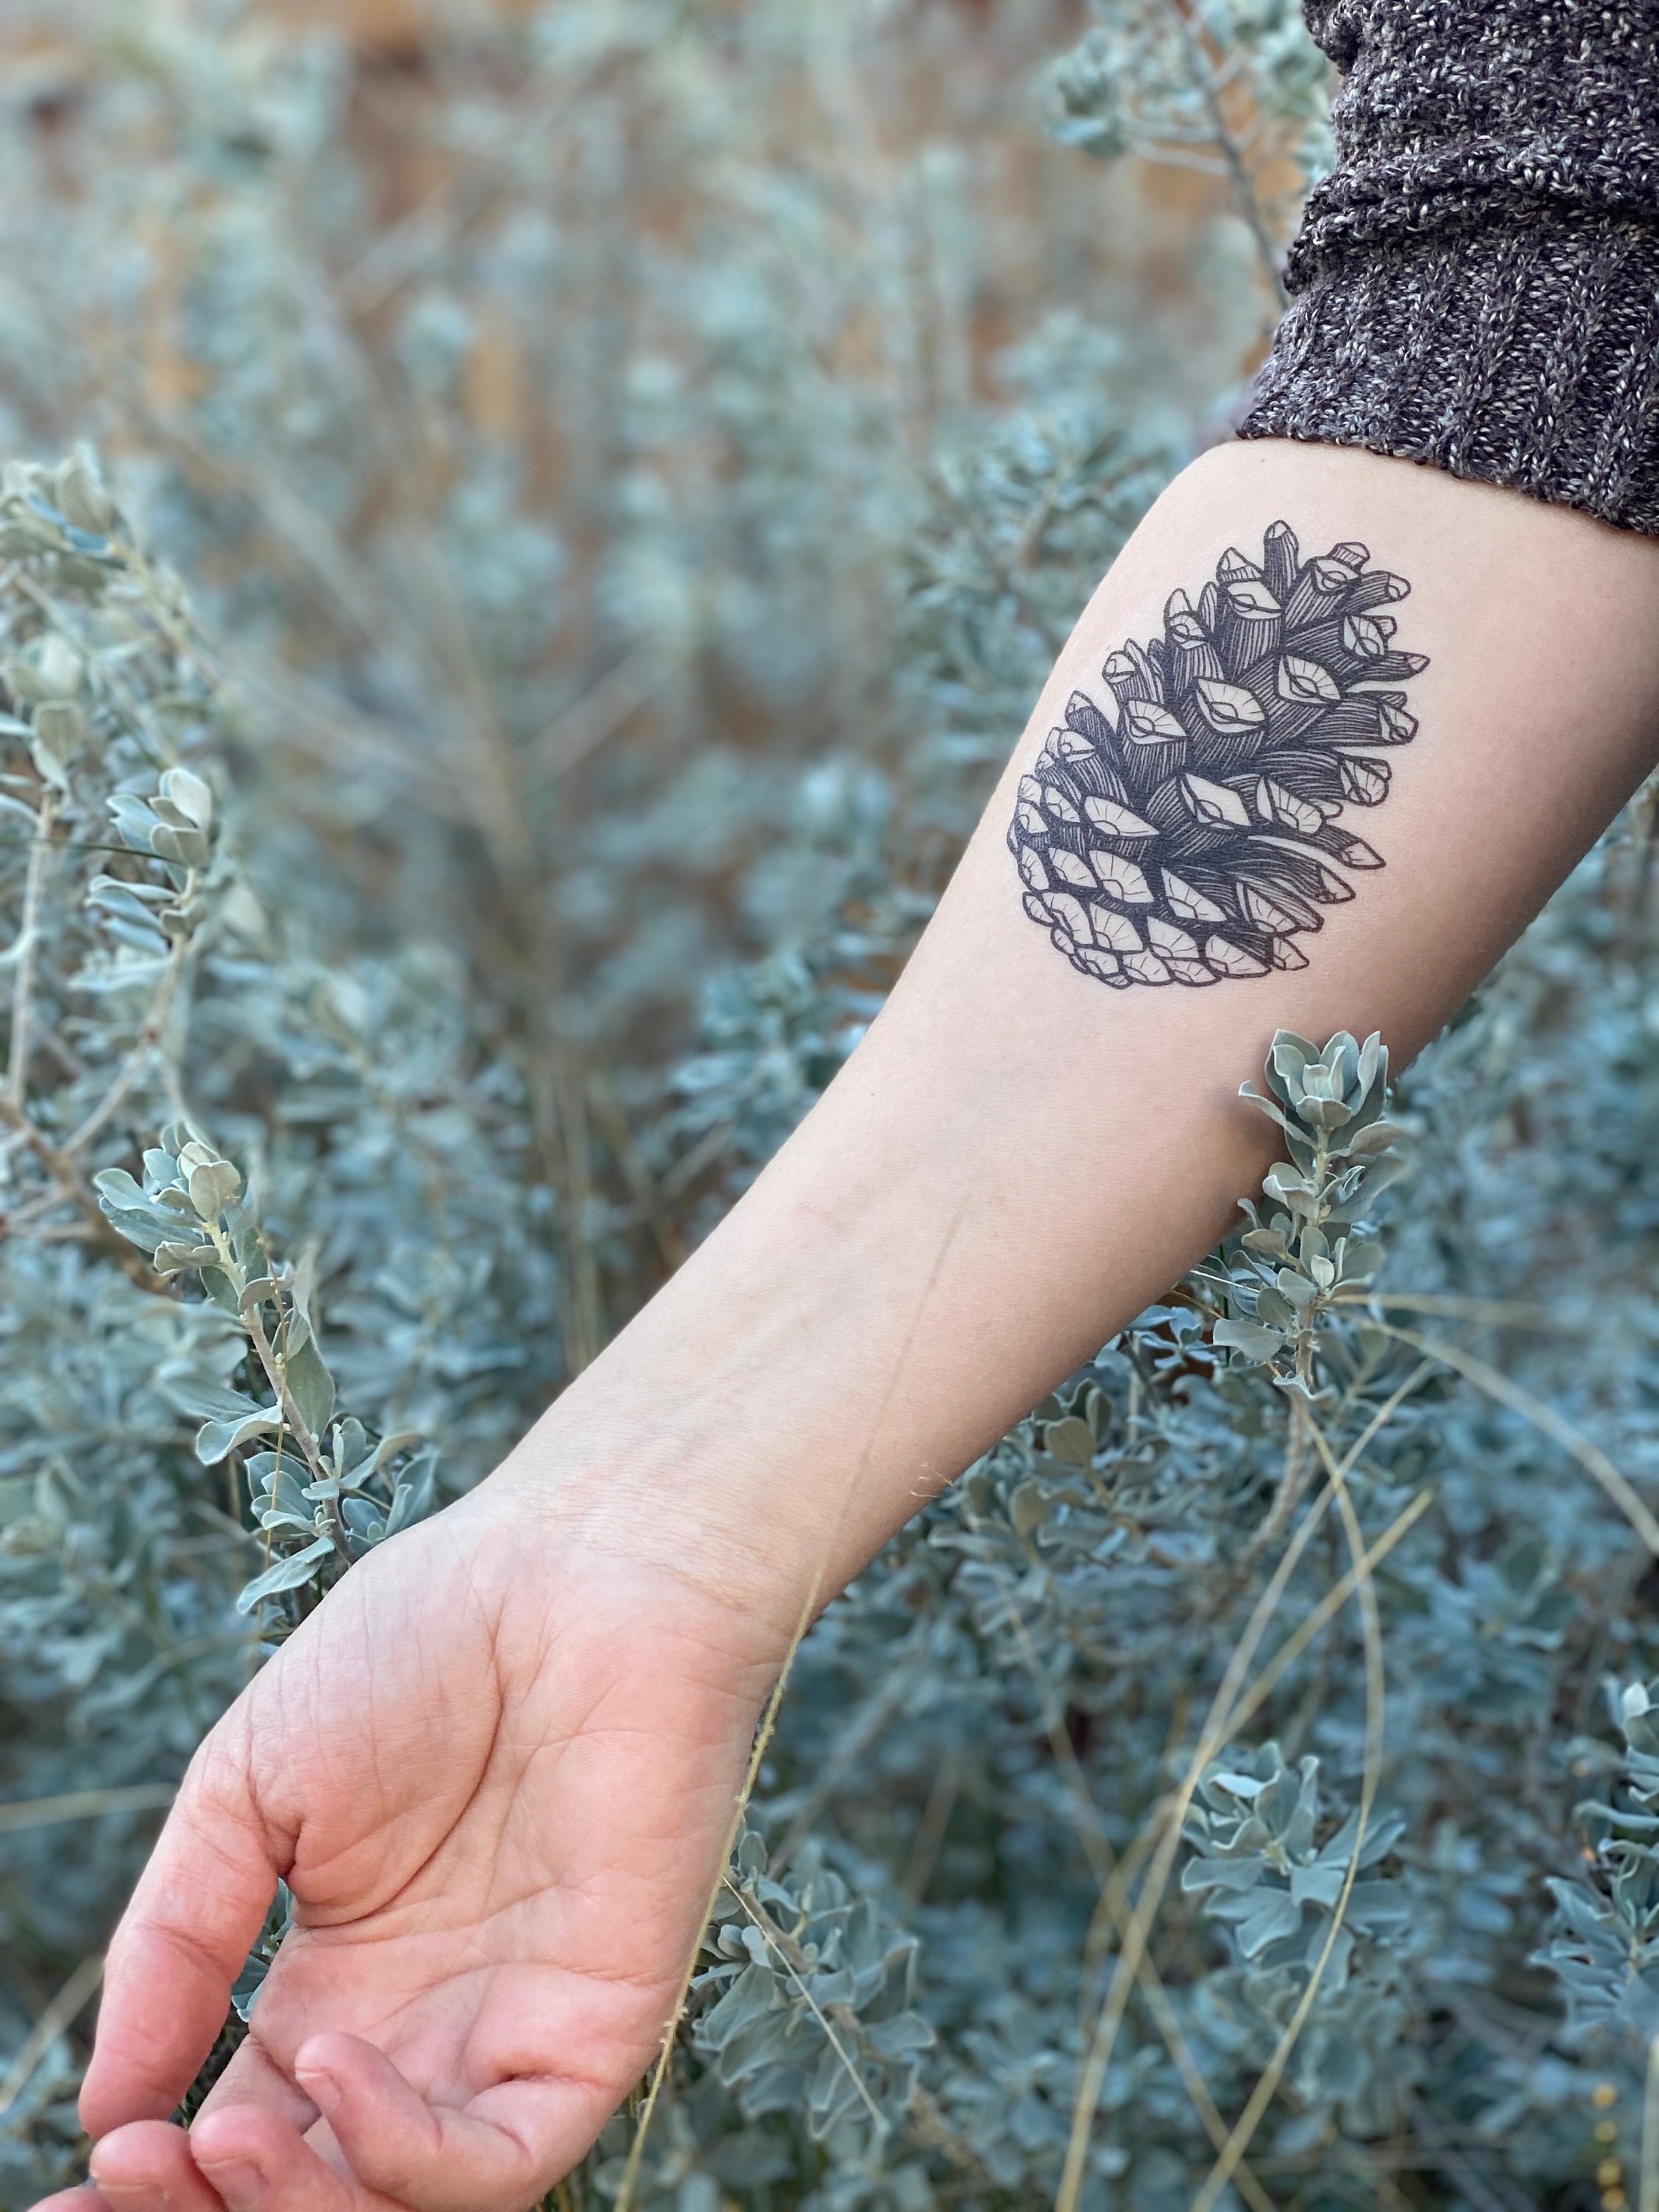 Evergreen Winter Semi-Permanent Tattoo. Lasts 1-2 weeks. Painless and easy  to apply. Organic ink. Browse more or create your own. | Inkbox™ |  Semi-Permanent Tattoos